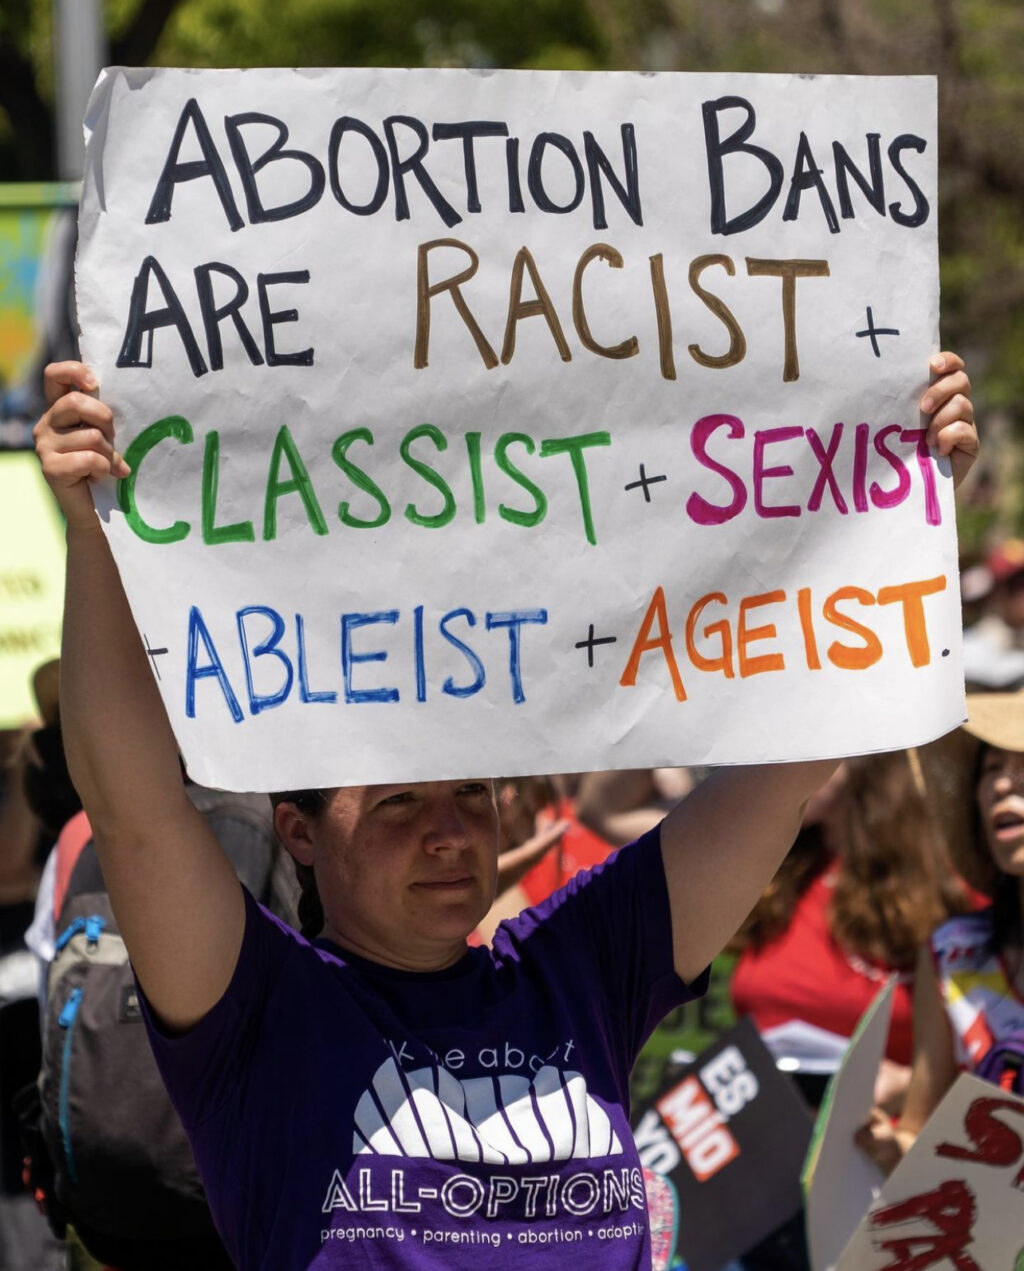 A pro-abortion protester holds up a multi-color sign that says “Abortion bans are racist, classist, sexist, ableist and ageist” at a protest, June 2022.